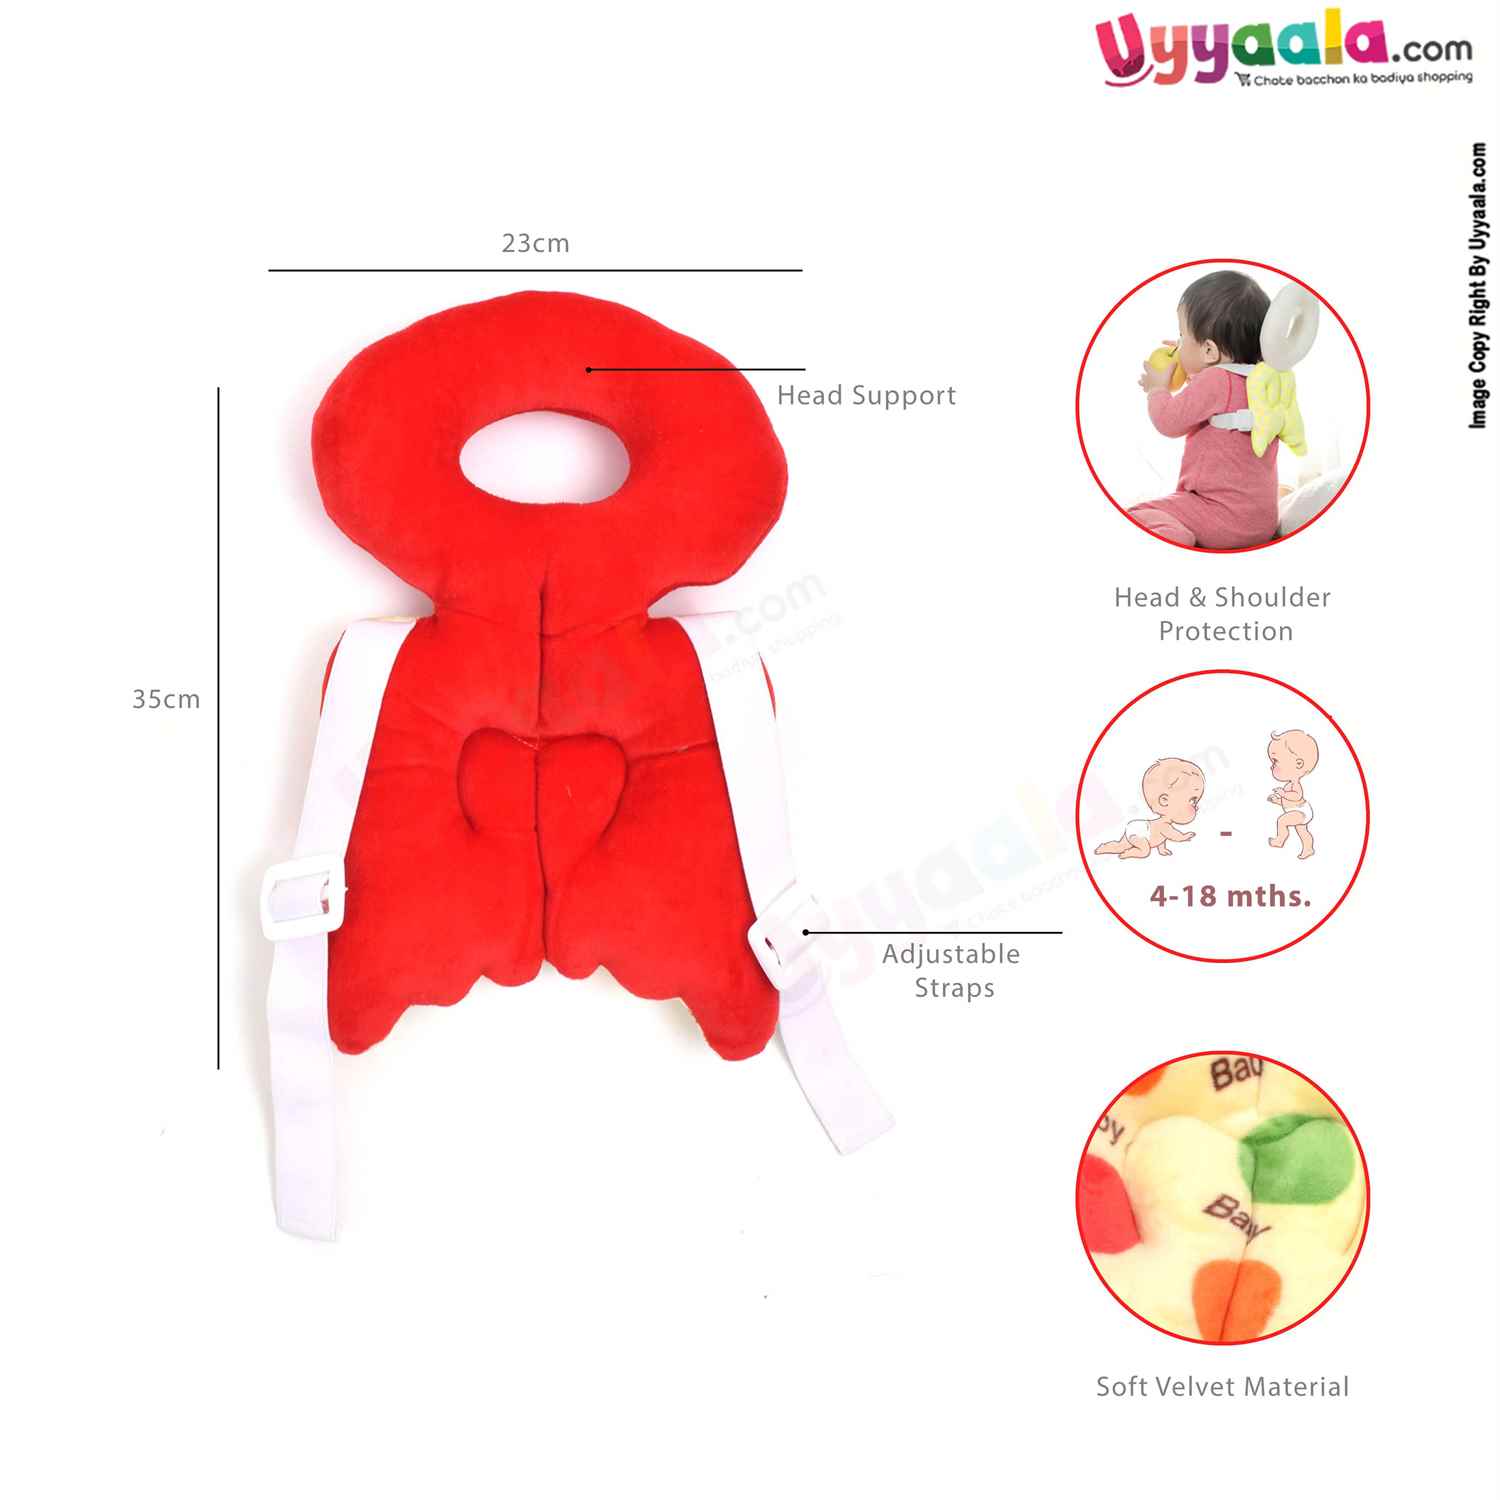 Head Protector Pillow for babies